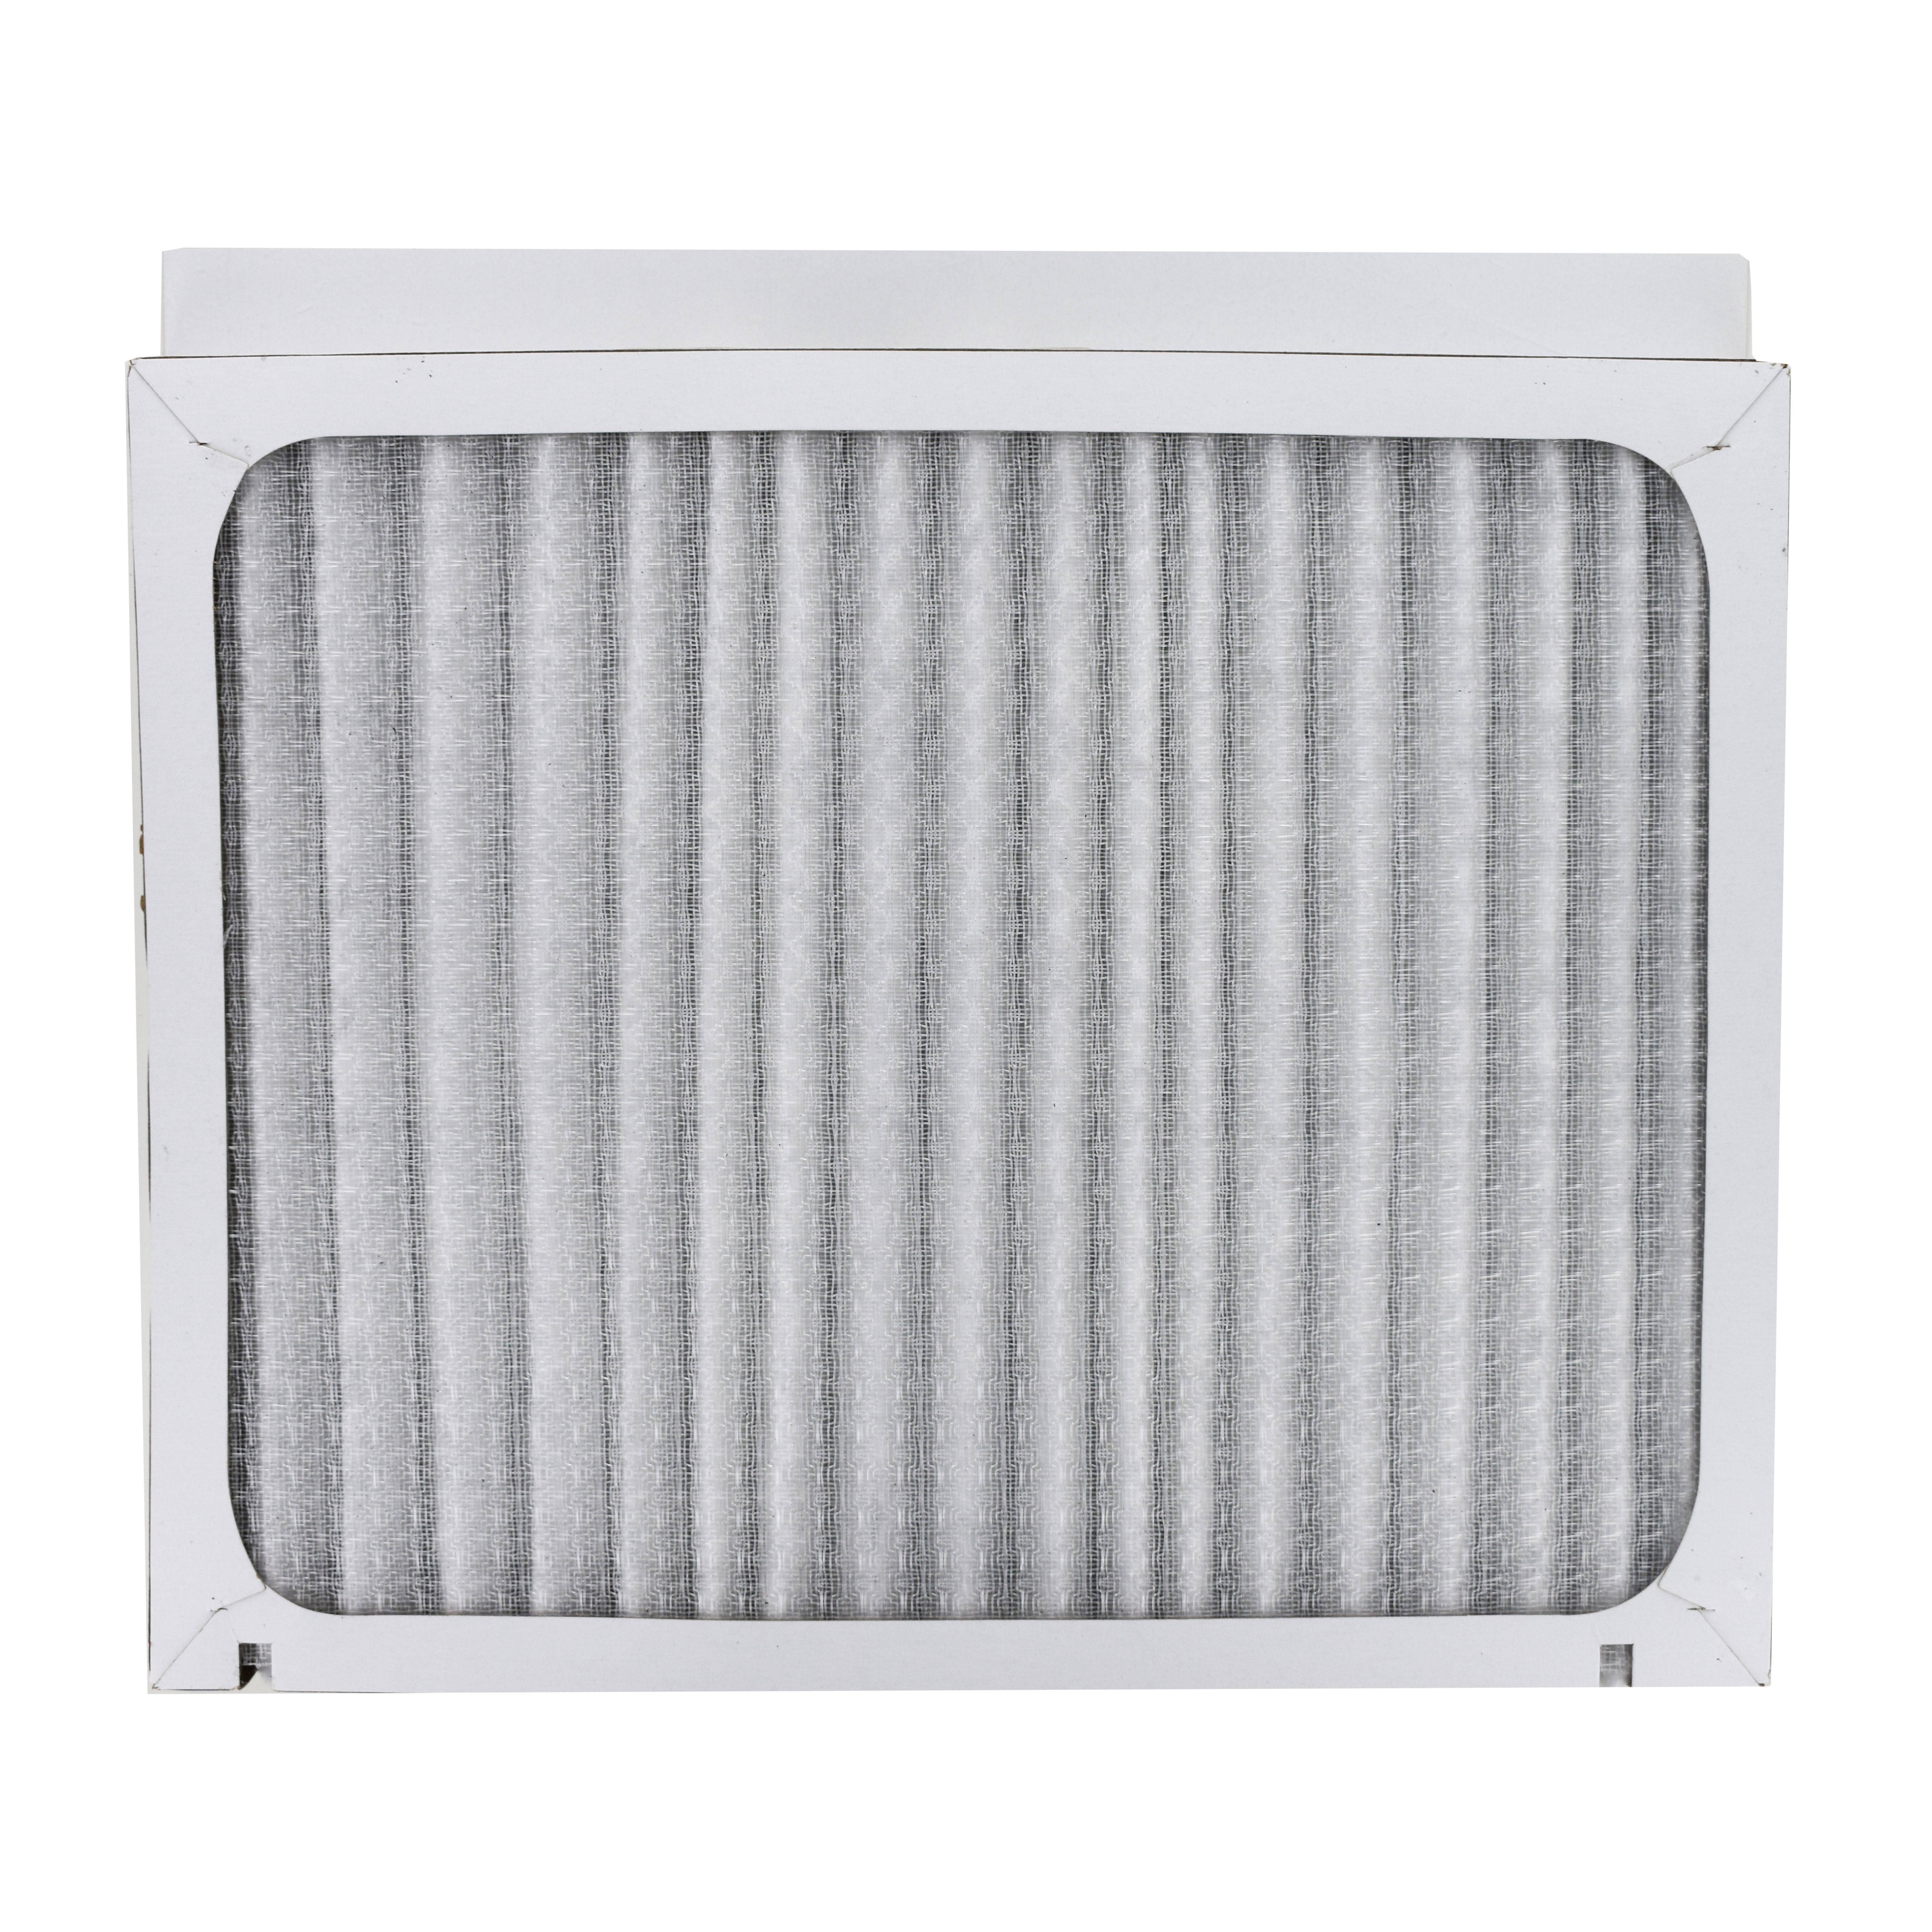 30928 Filters Fast&reg; HEPAtech Air Purifier Filter Replacement for Hunter 30928